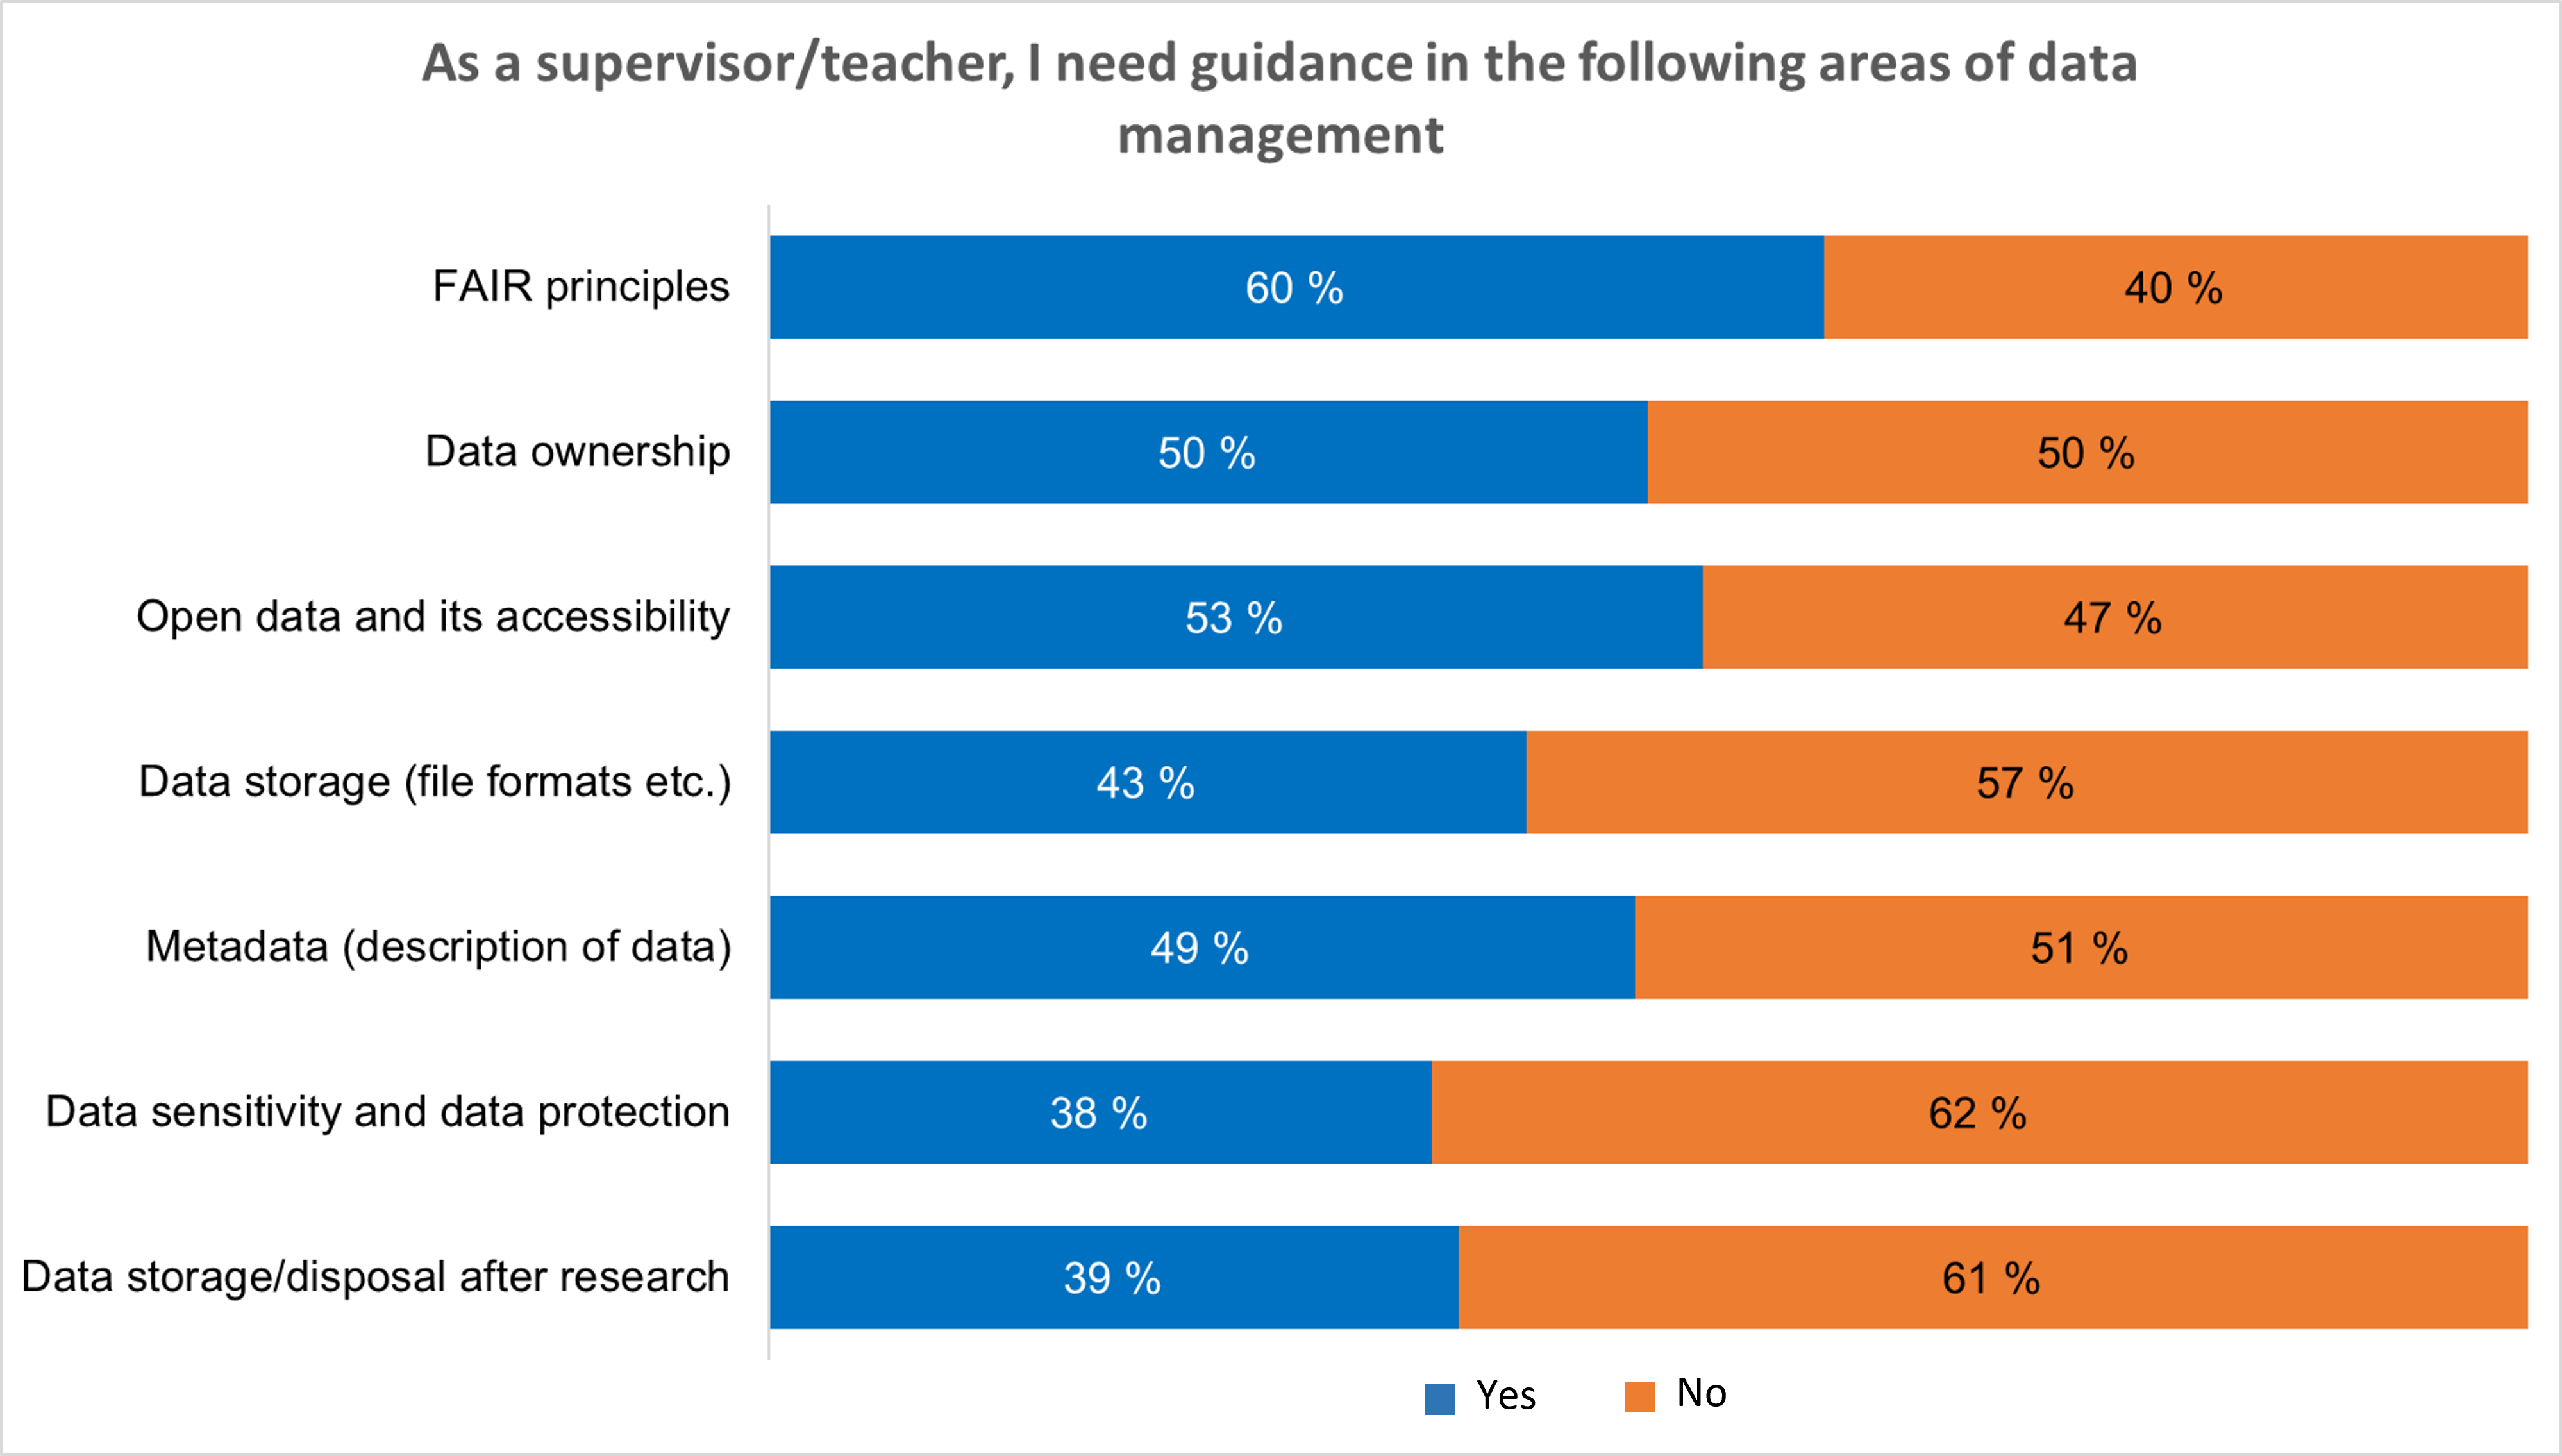 Graph. I need guidance in: FAIR principles Yes 60%, No 40%. Data ownership Yes 50%, No 50%. Open data Yes 53%, No 47%. Data storage Yes 43%, No 57%. Metadata Yes 49%, No 51%. Data sensitivity and data protection Yes 38%, No 62%. Data storage/disposal after research Yes 39%, No 61%. 